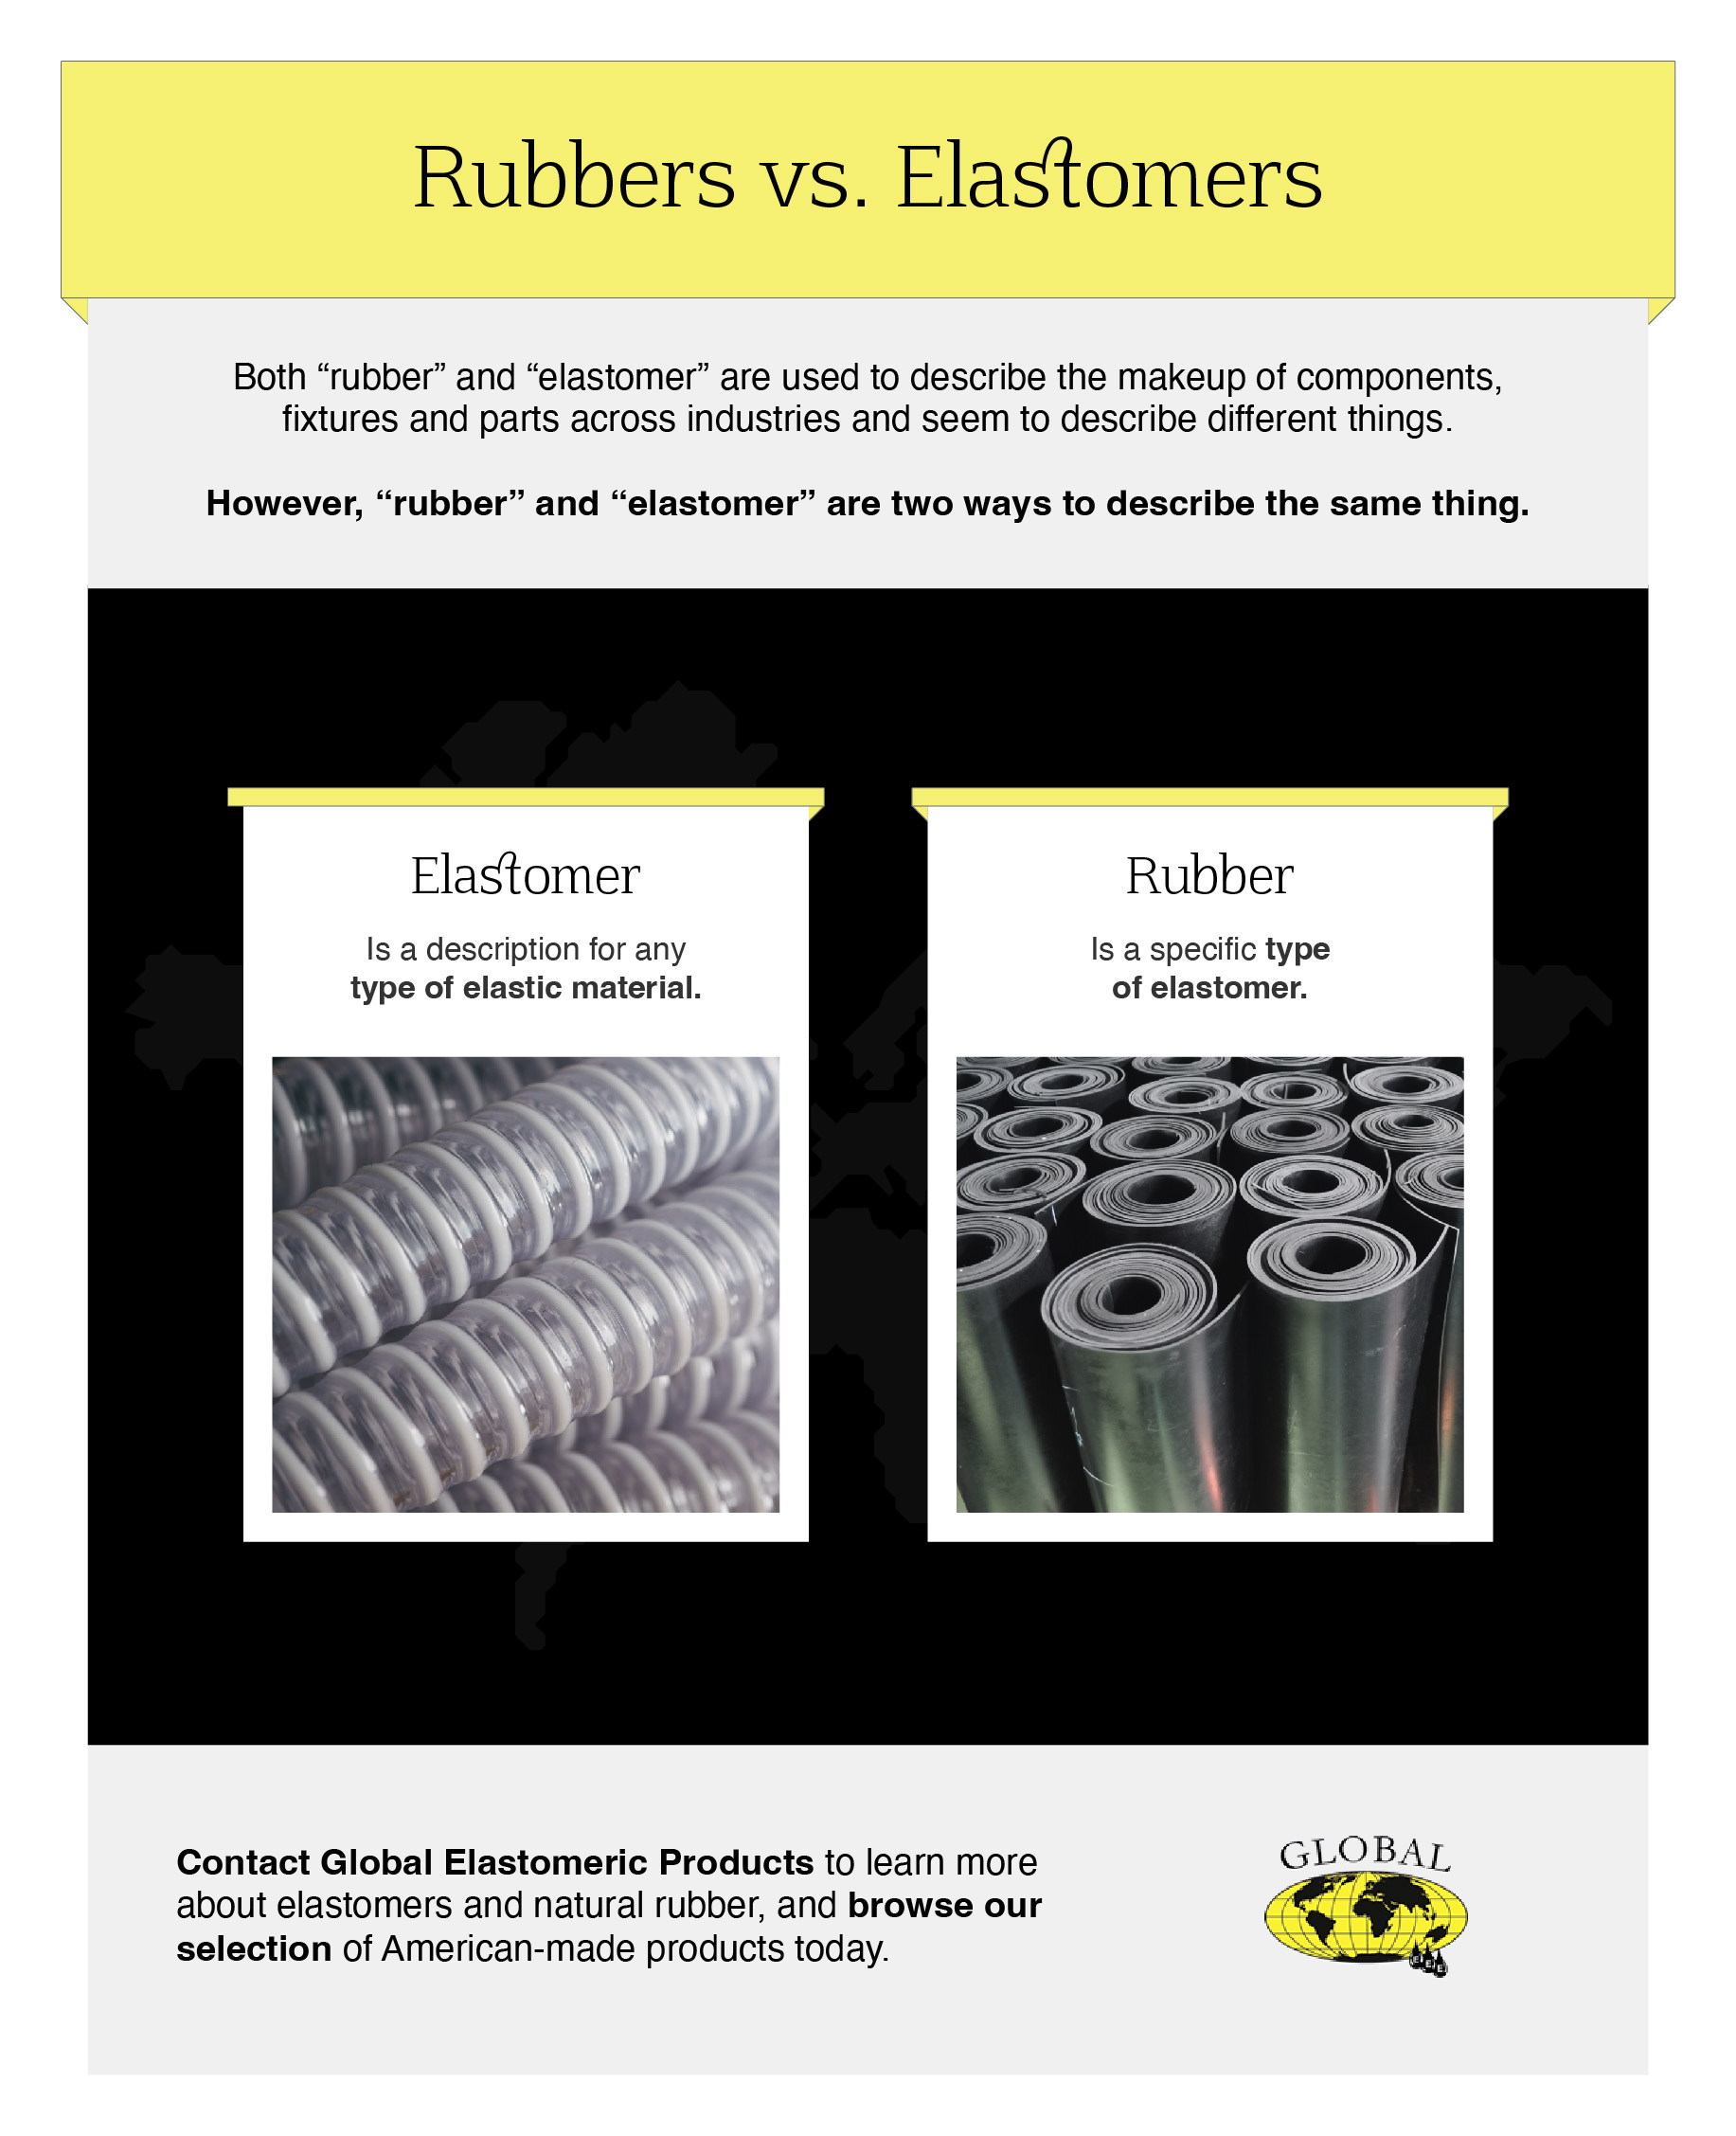 dempen Rijpen zout What's The Difference Between Elastomers and Rubbers?